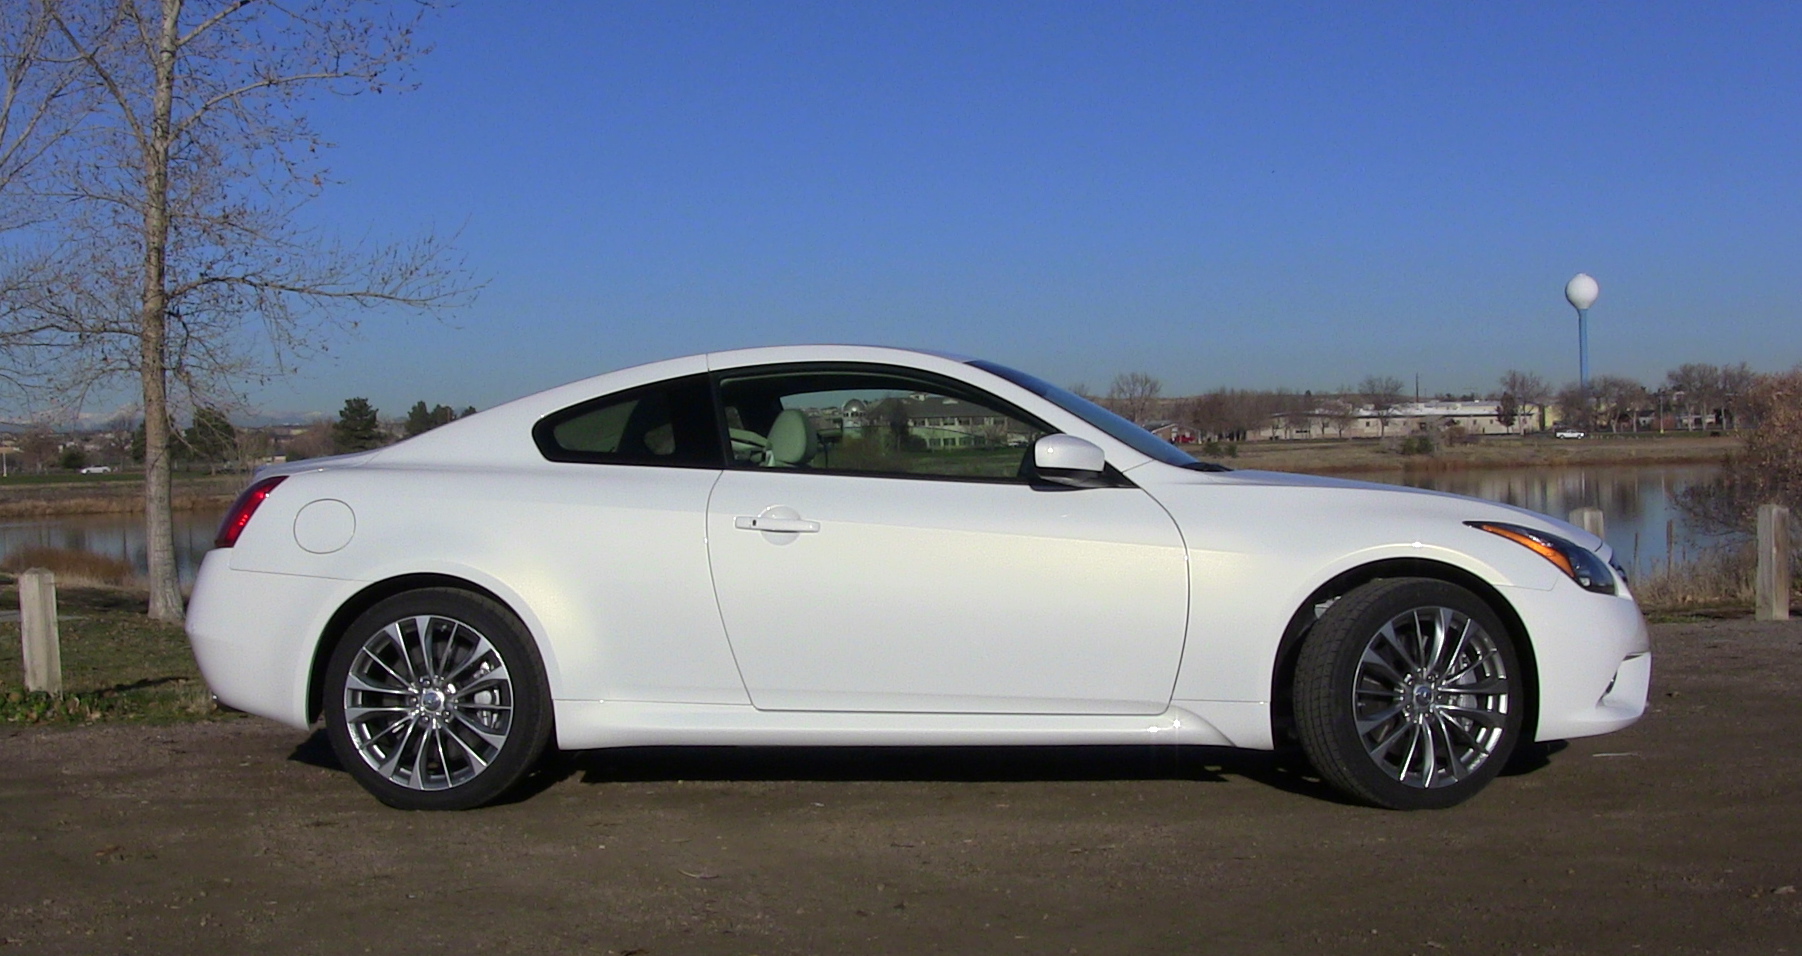 Review: 2013 Infiniti G37 Coupe is the Mongoose of Luxury Sport Coupes